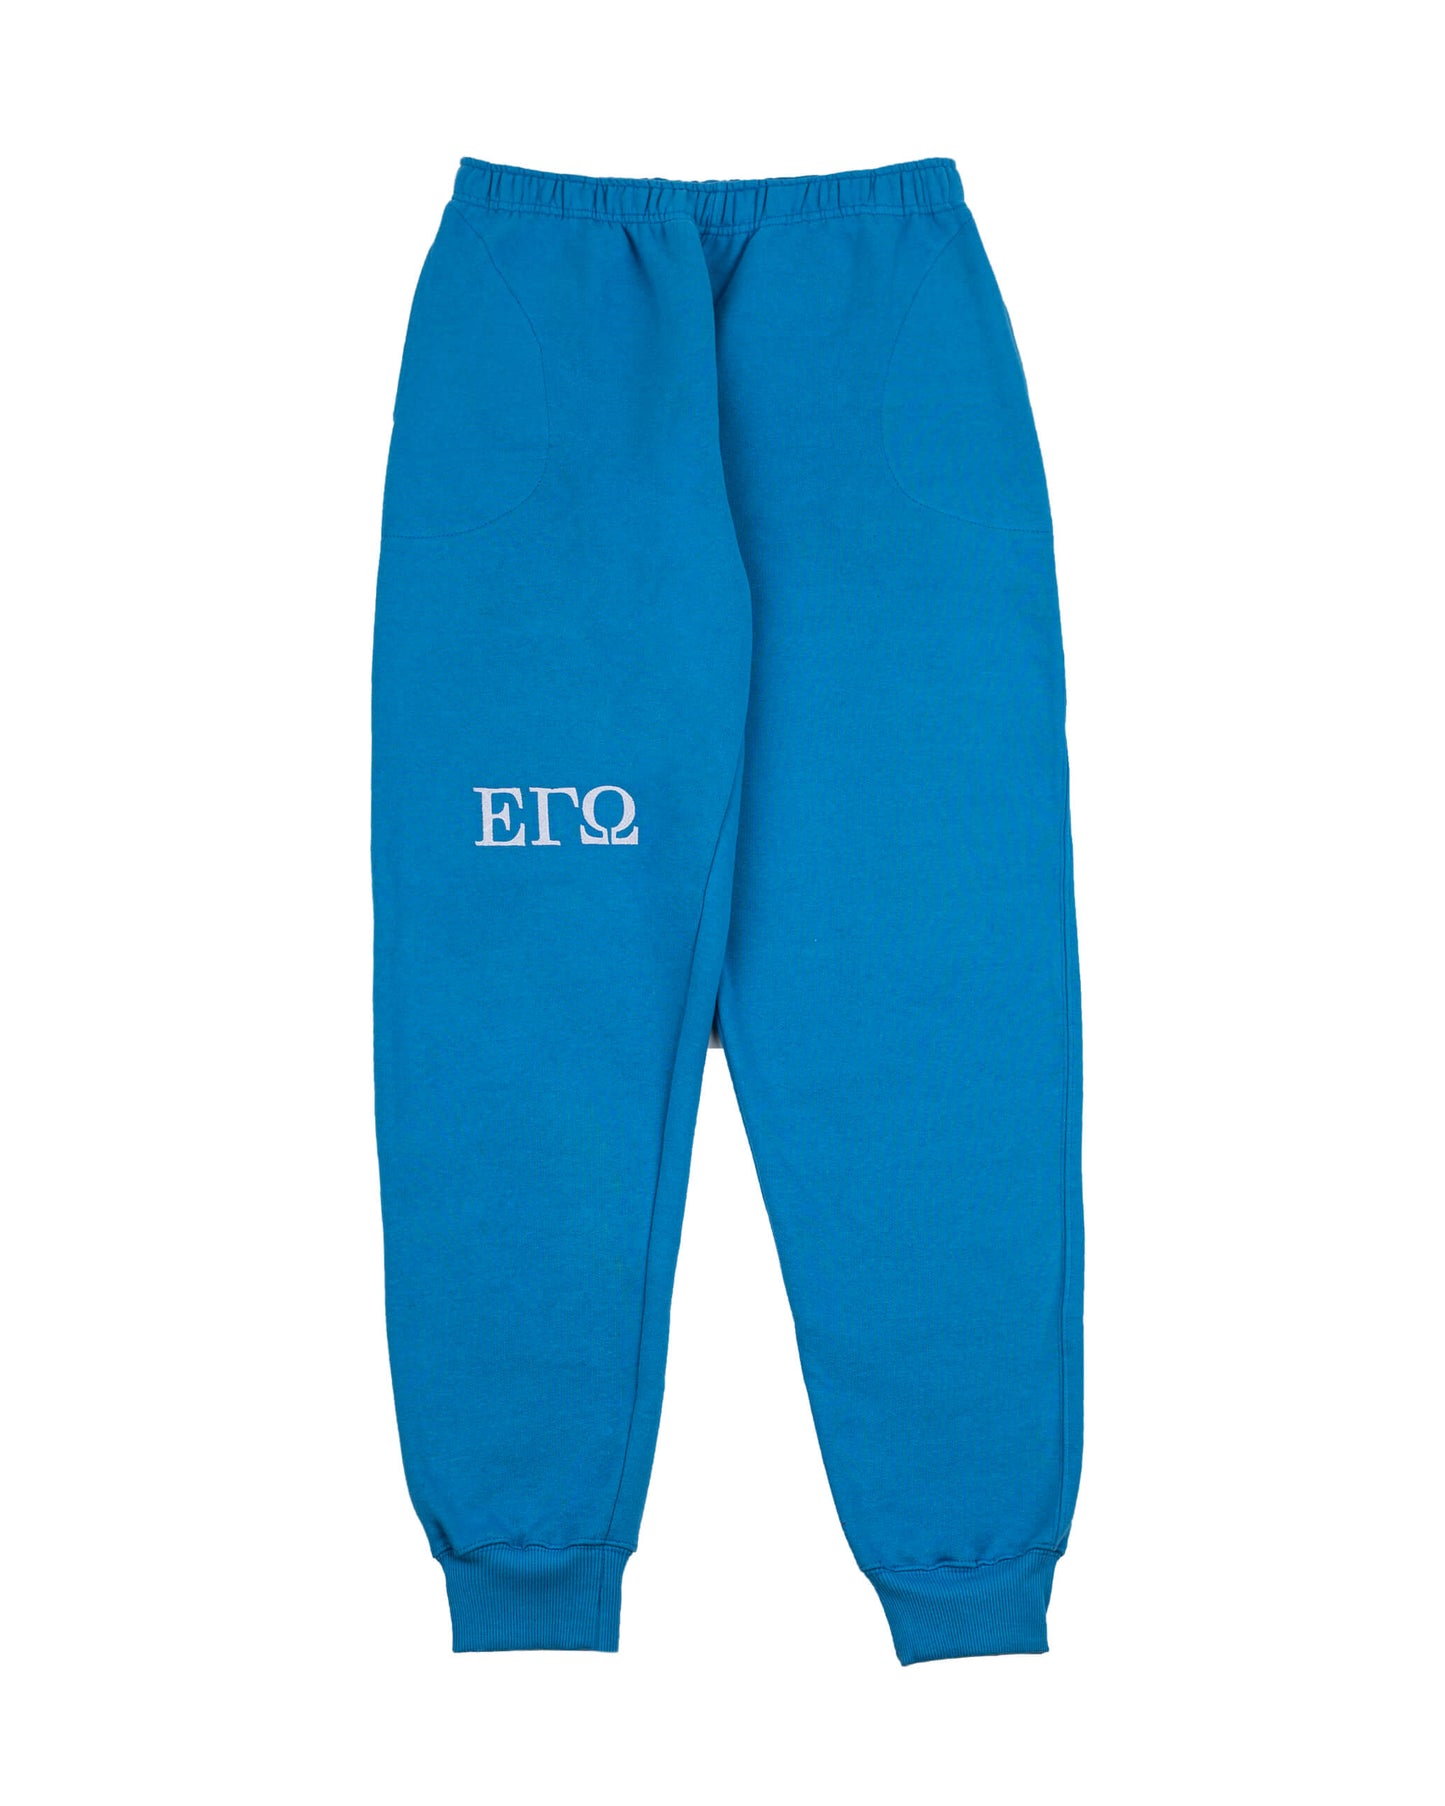 The baby blue sweat pants